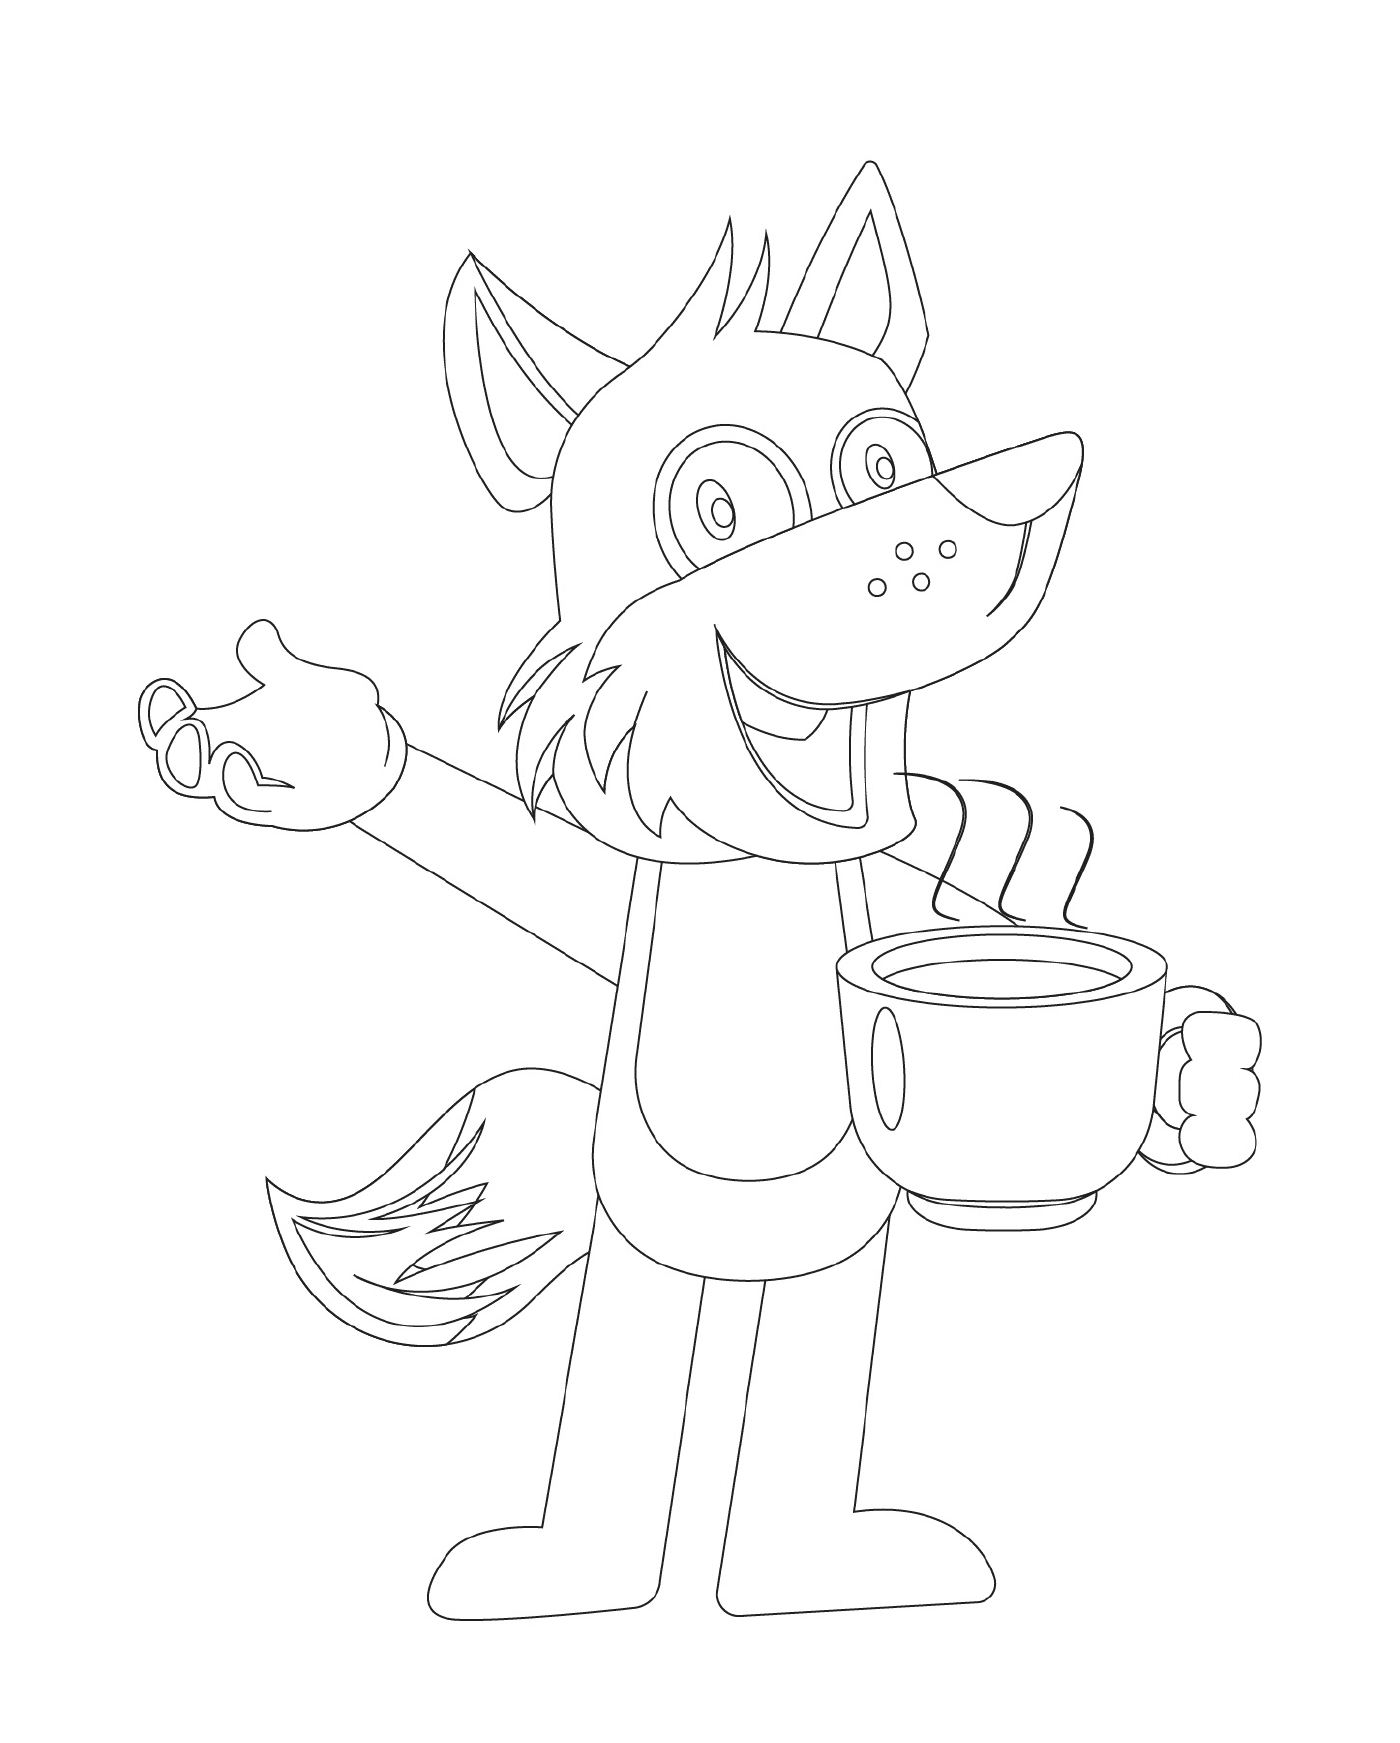  Wolf taking a coffee 